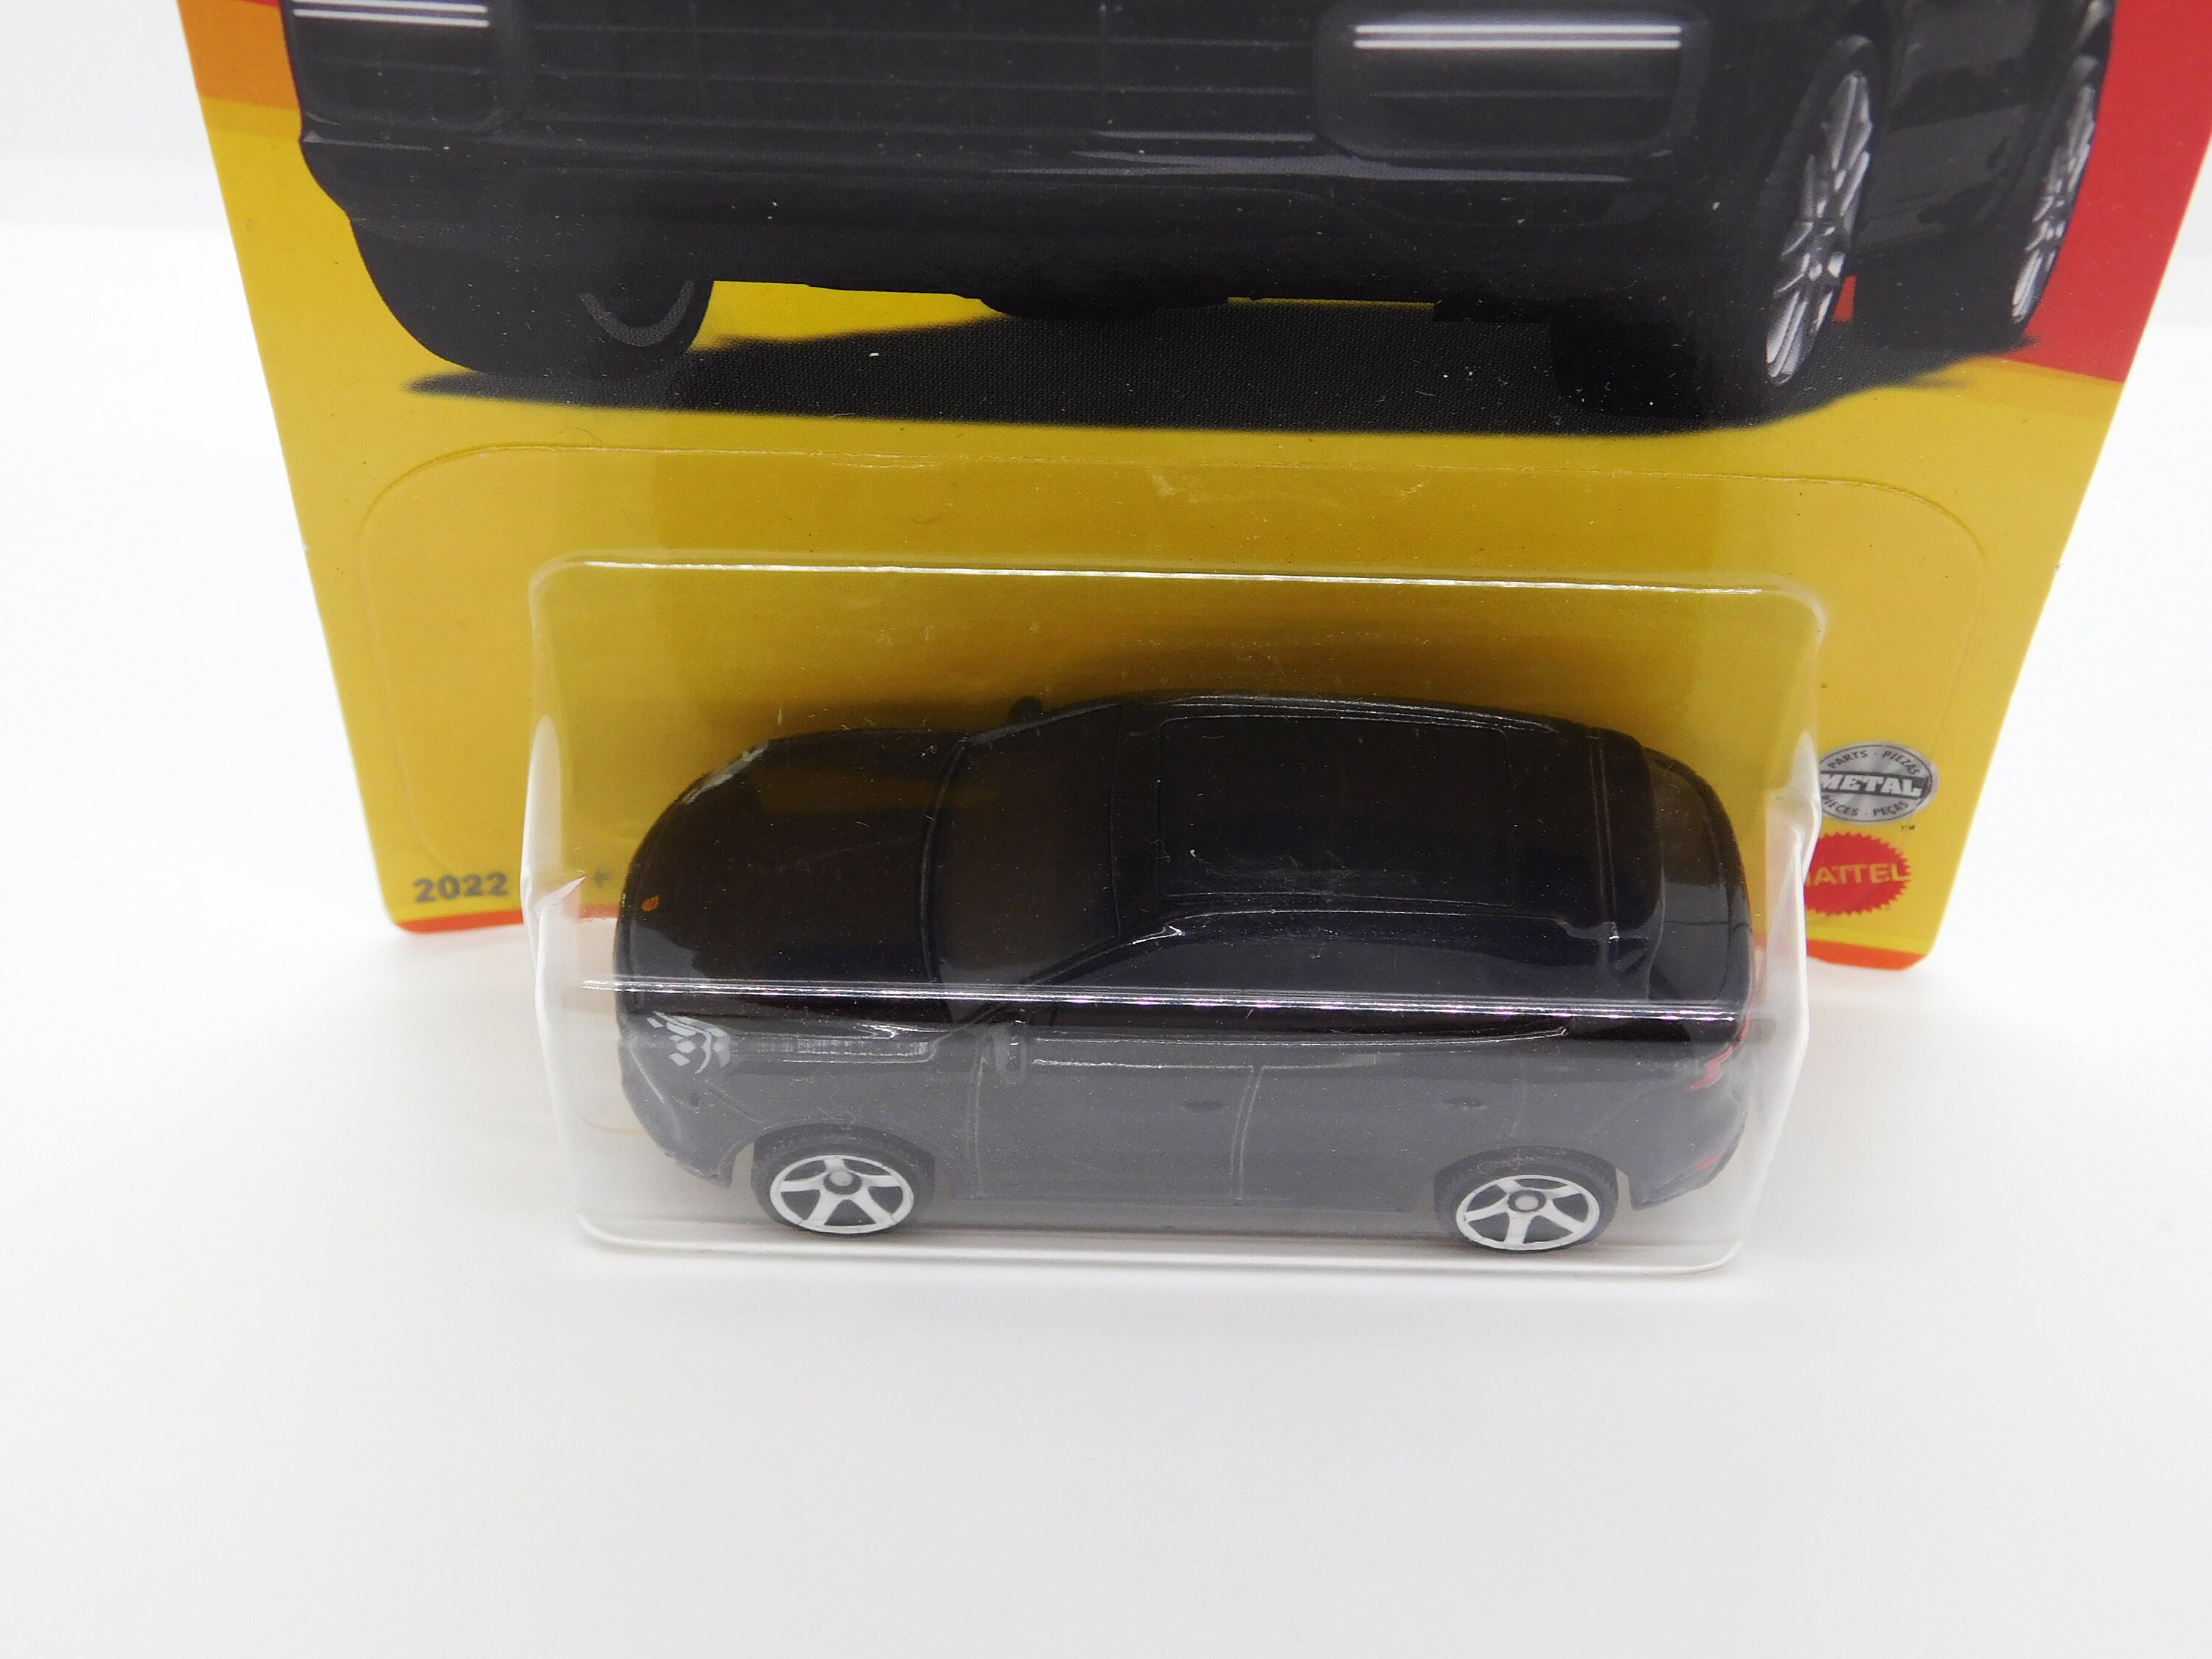 Matchbox Porsche Cayenne Turbo Rare Miniature Collectible Model ,geschenk  ..WORLDWIDE Shipping With Tracking Number EVERY DAY -  Israel